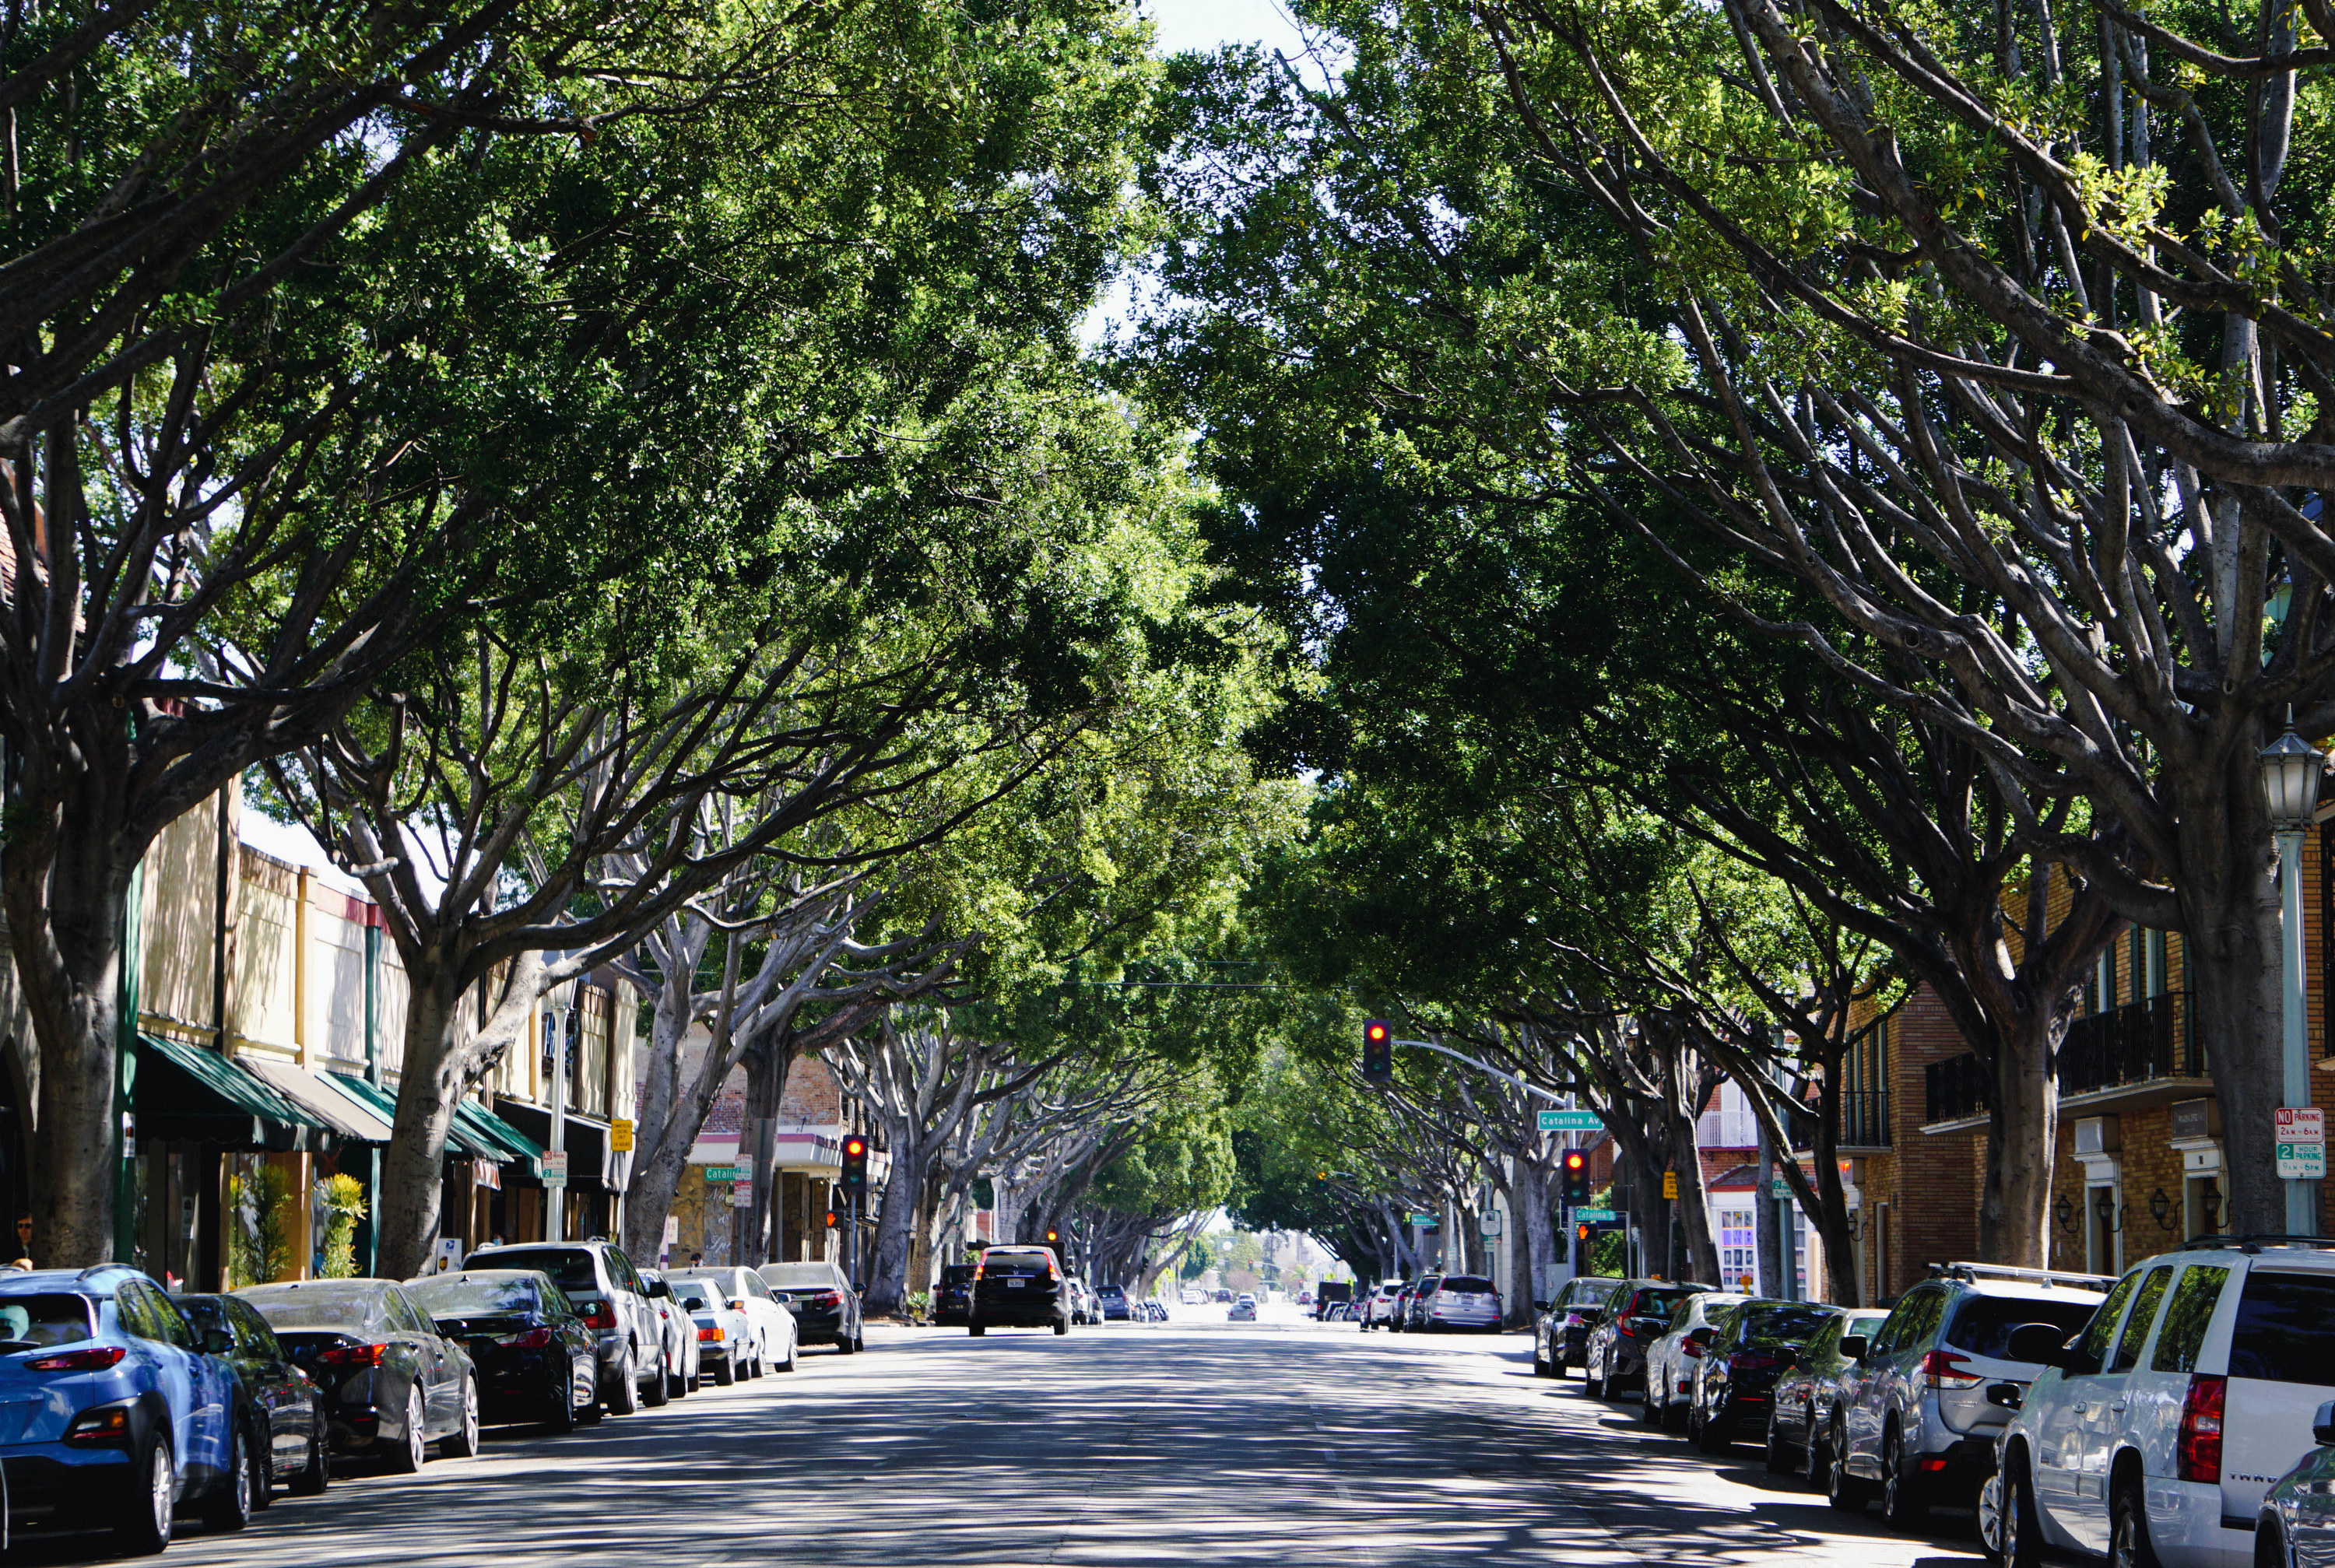 Trees line a main street with shops on the sides